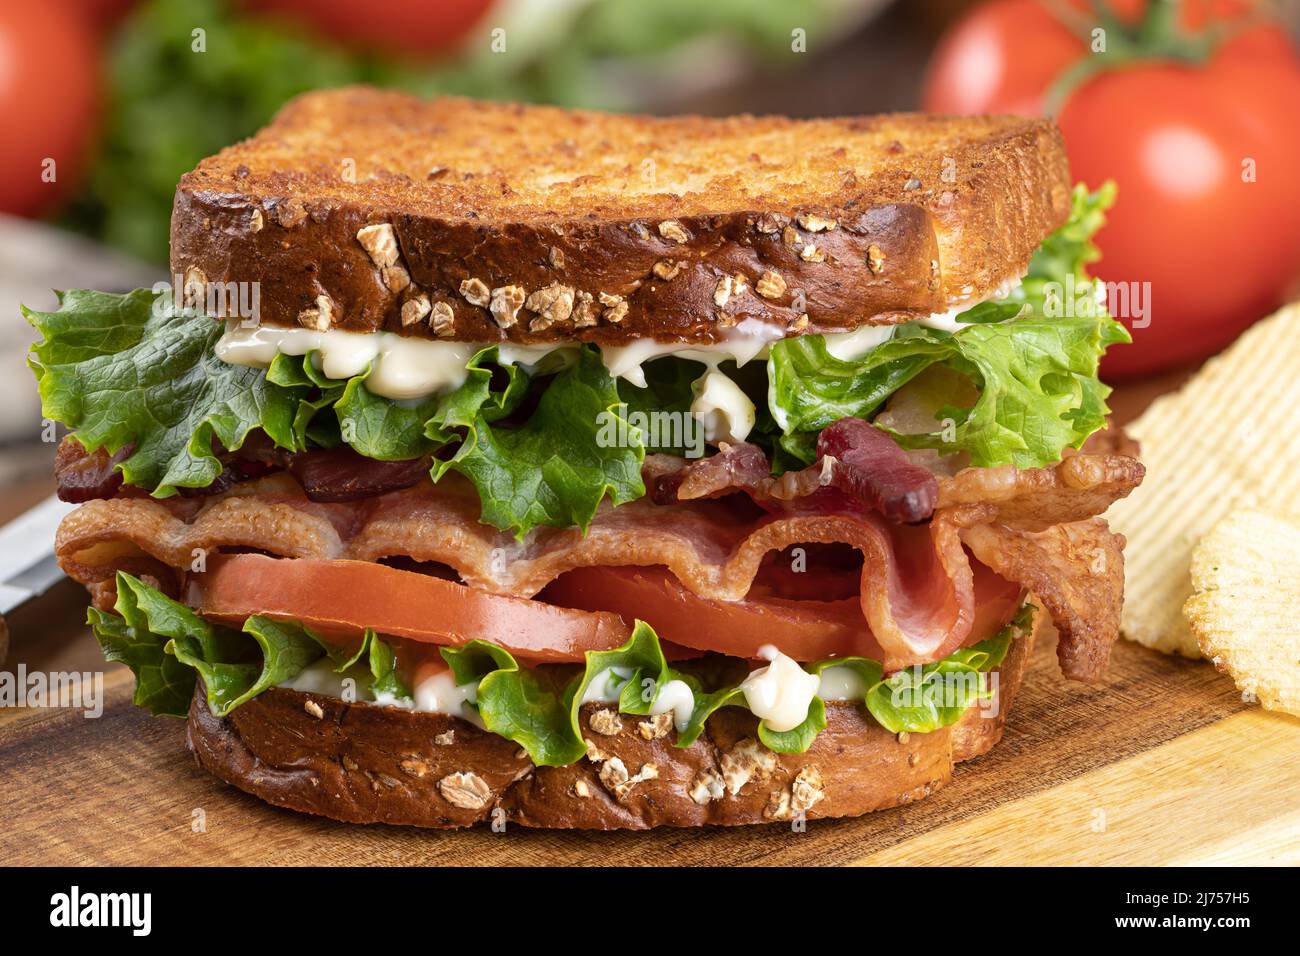 Closeup of blt sandwich made with bacon, lettuce and tomato on toasted whole grain bread on a wooden cutting board Stock Photo